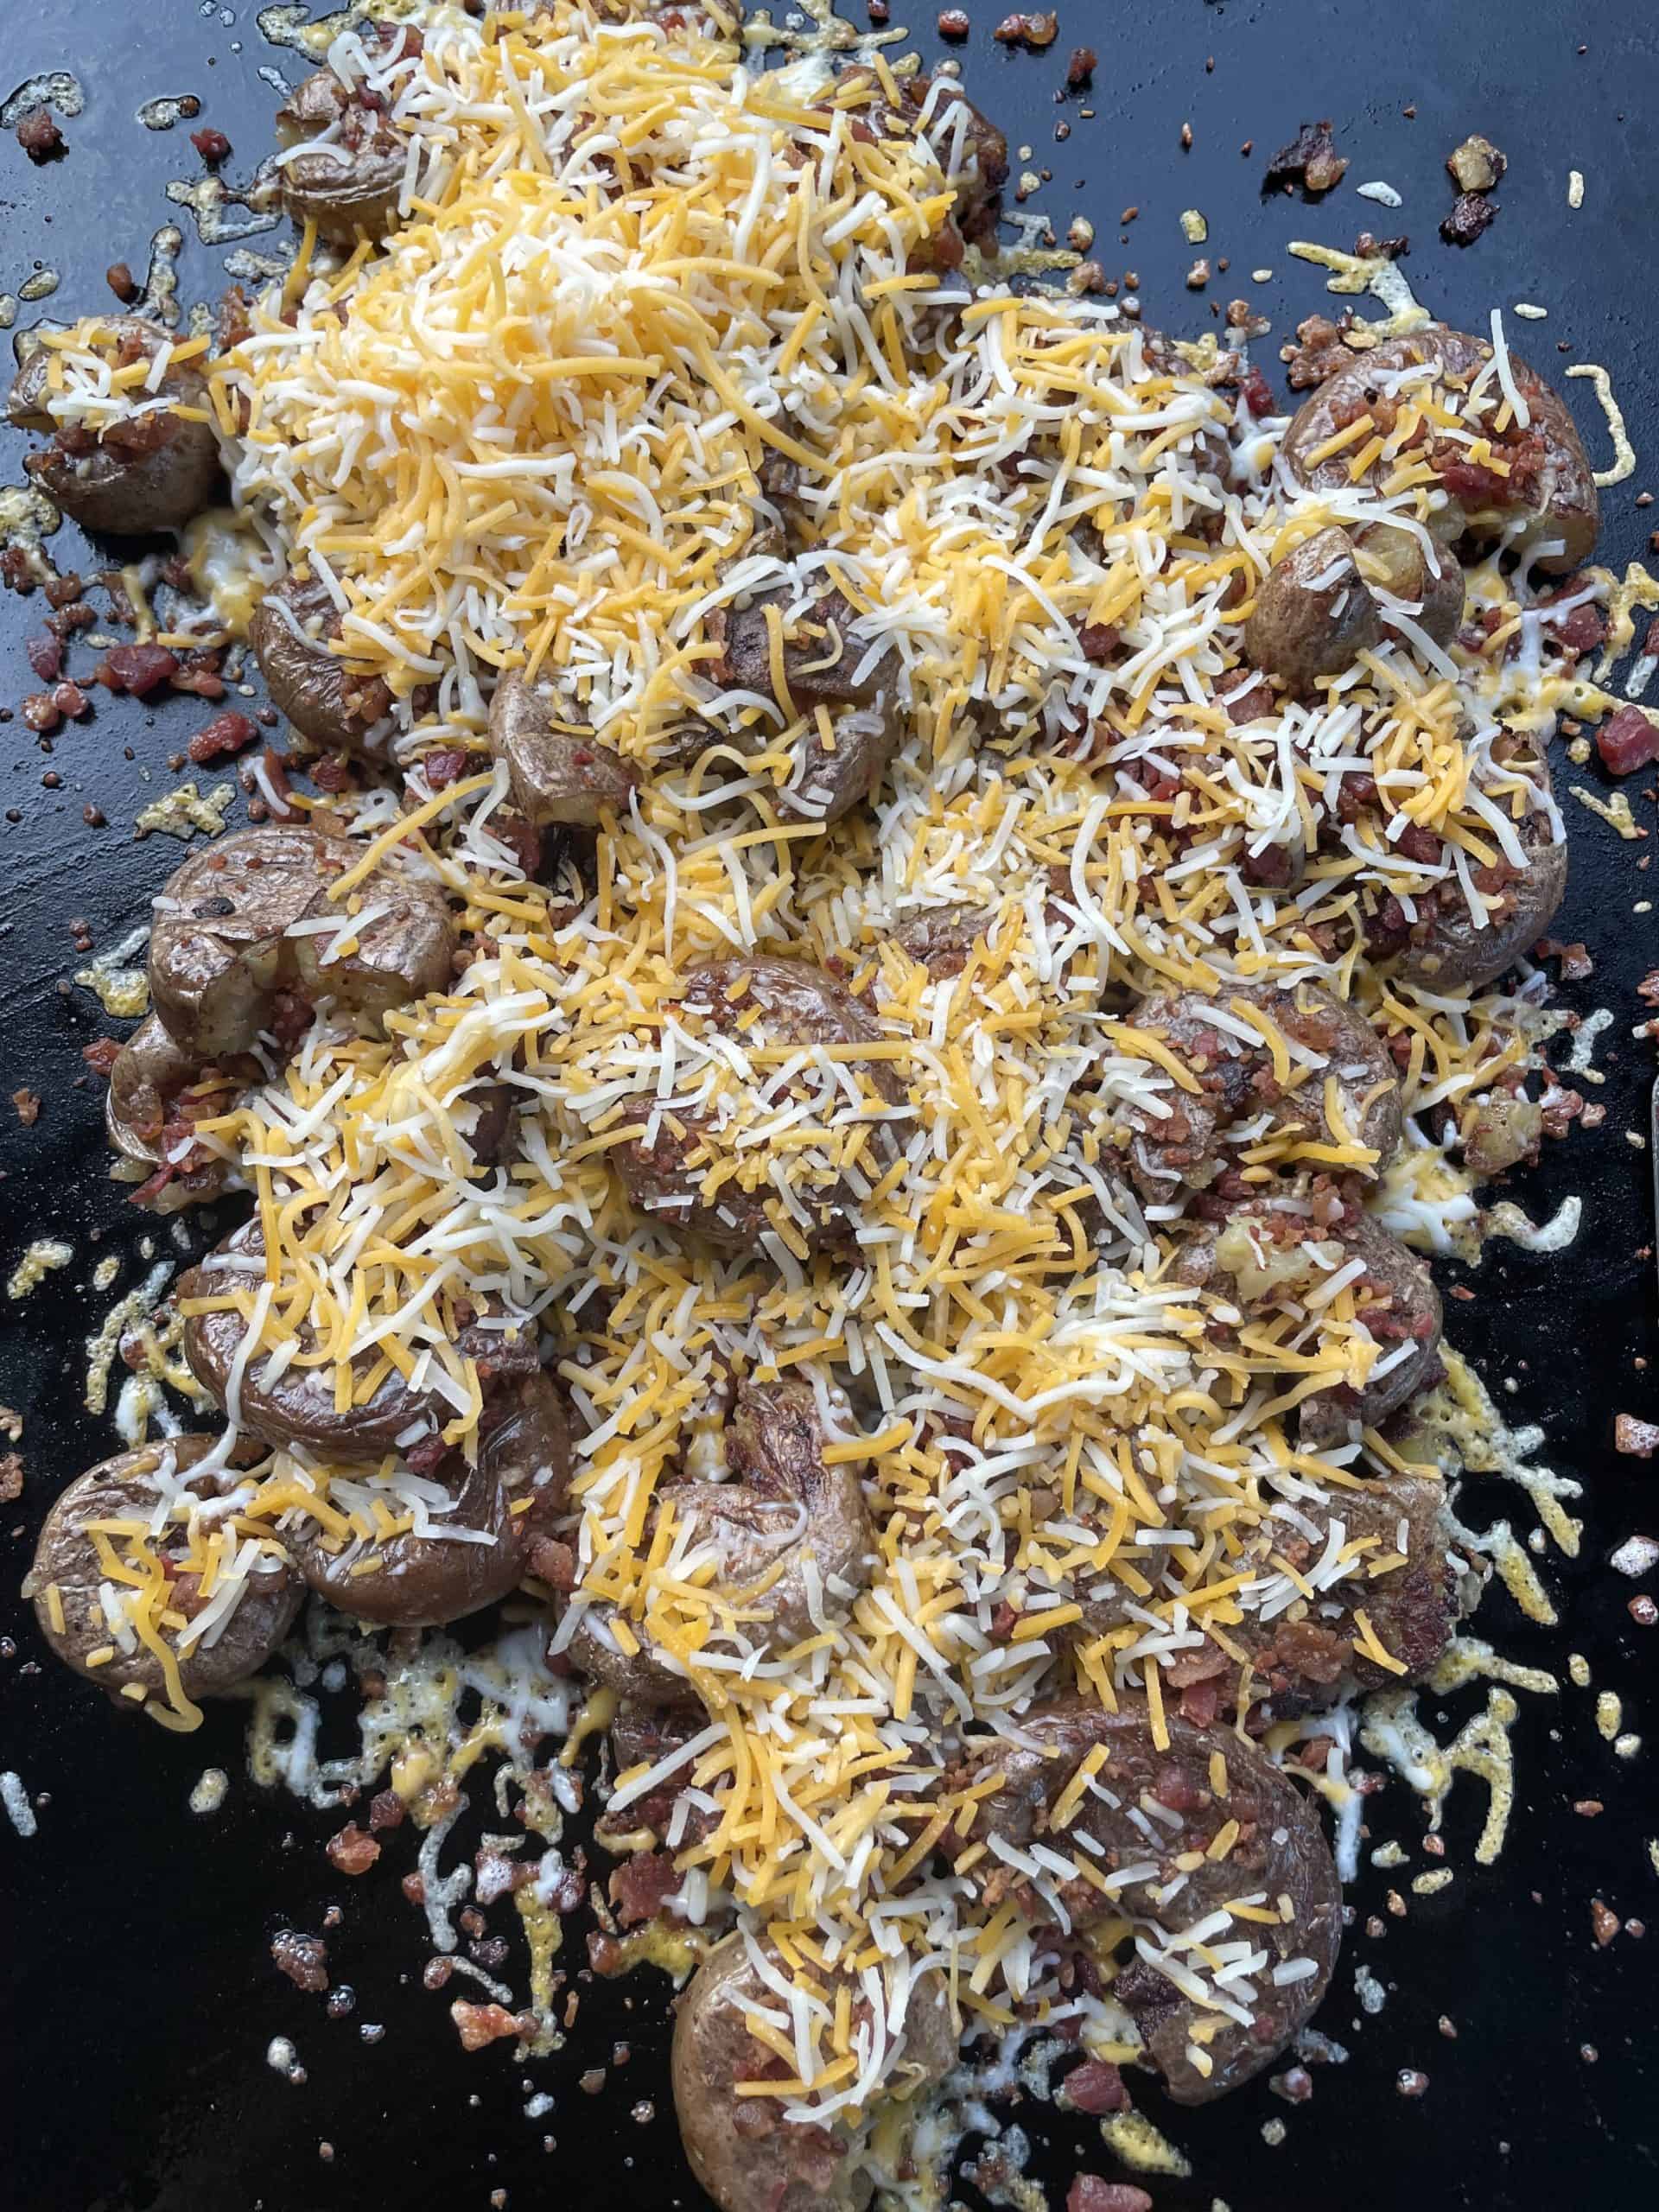 Top the bacon and potatoes with shredded cheese.